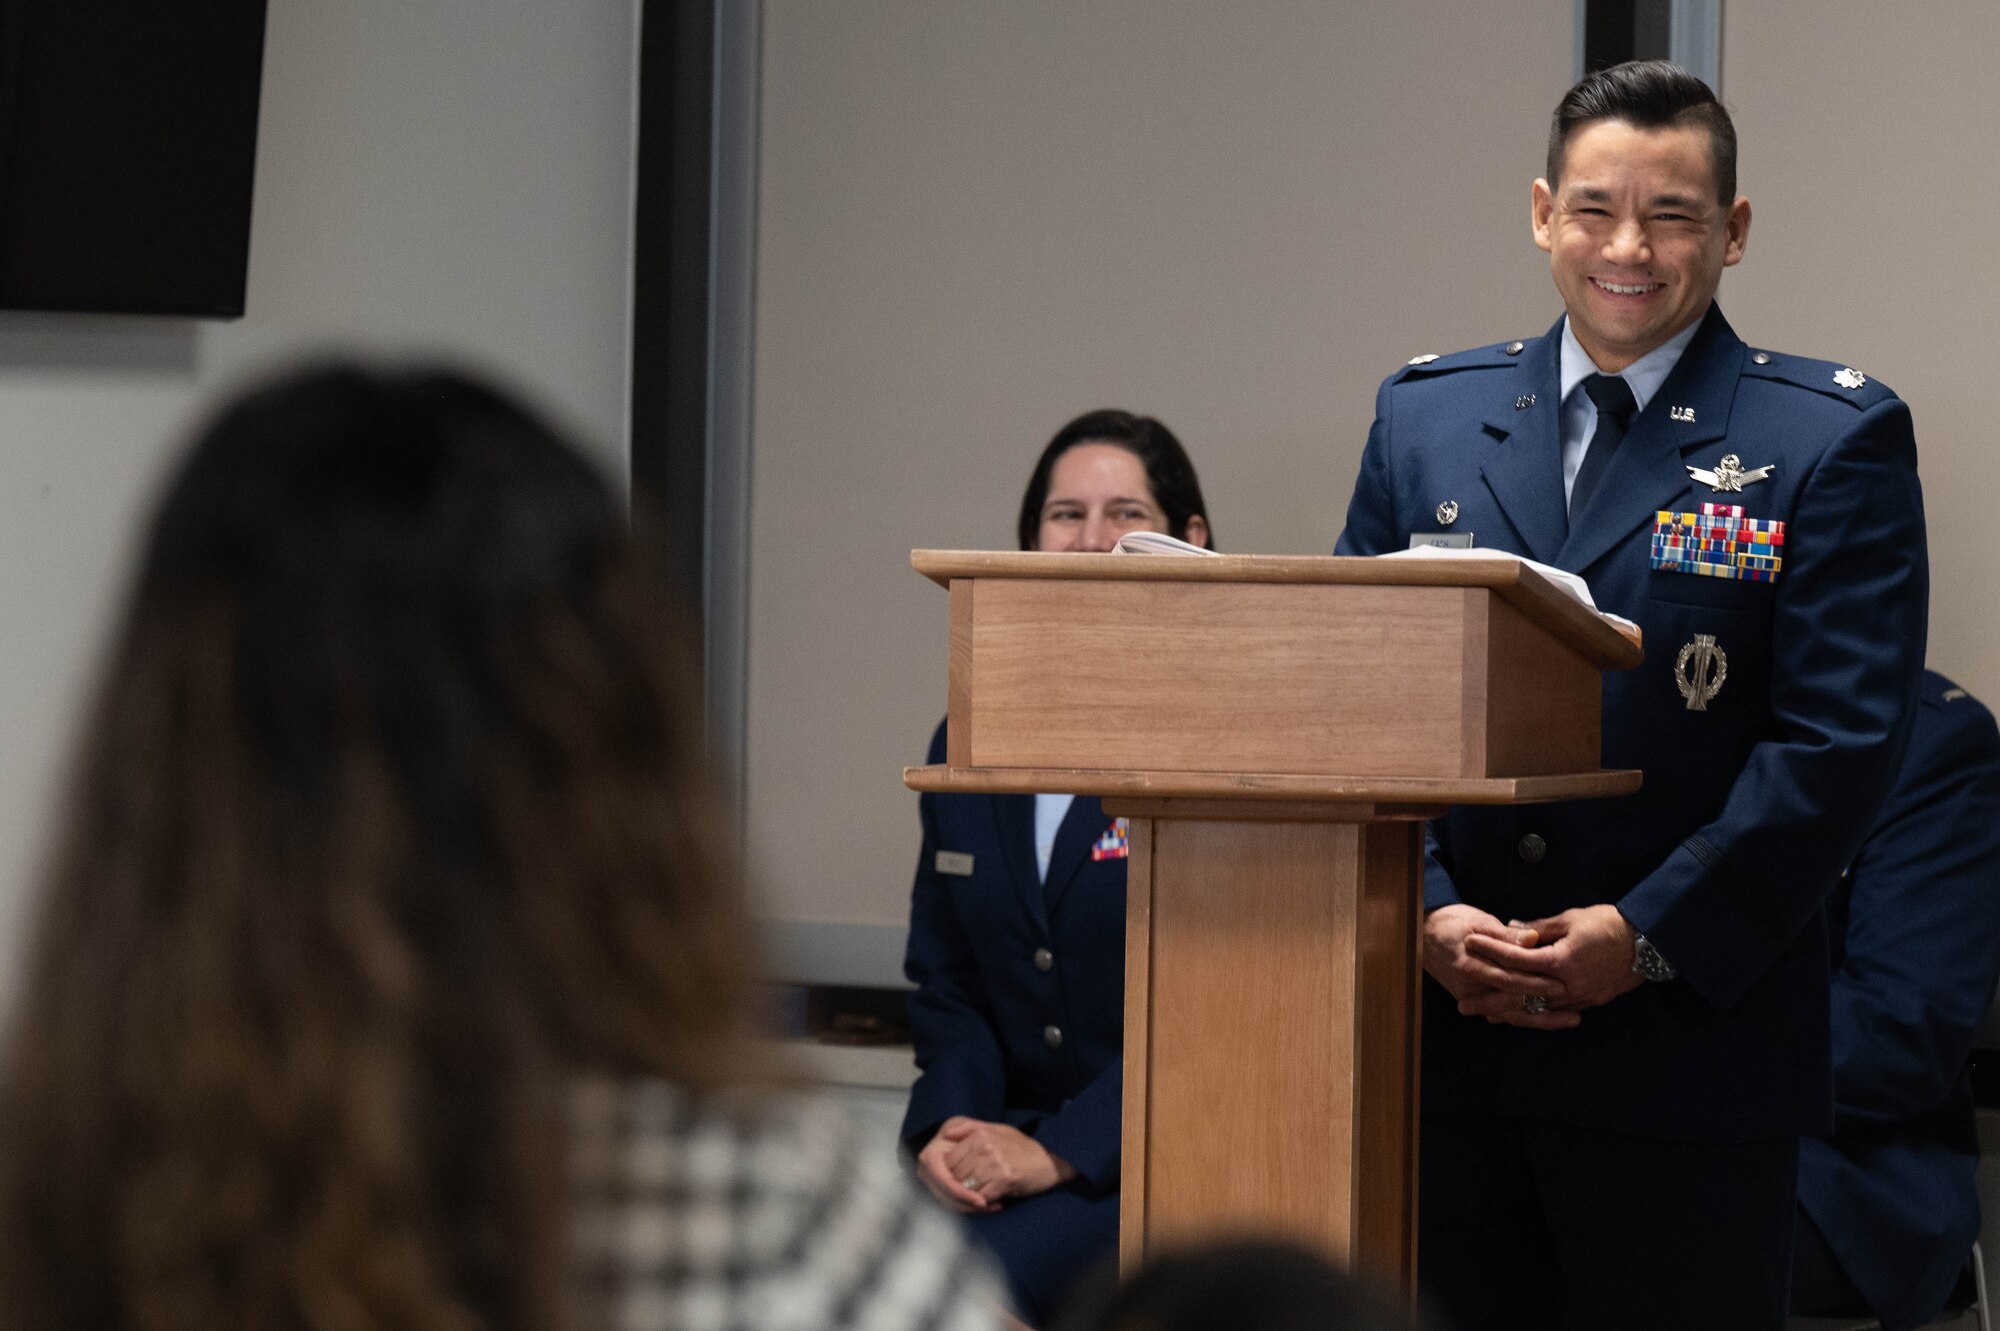 310th Operations Support Squadron change of command